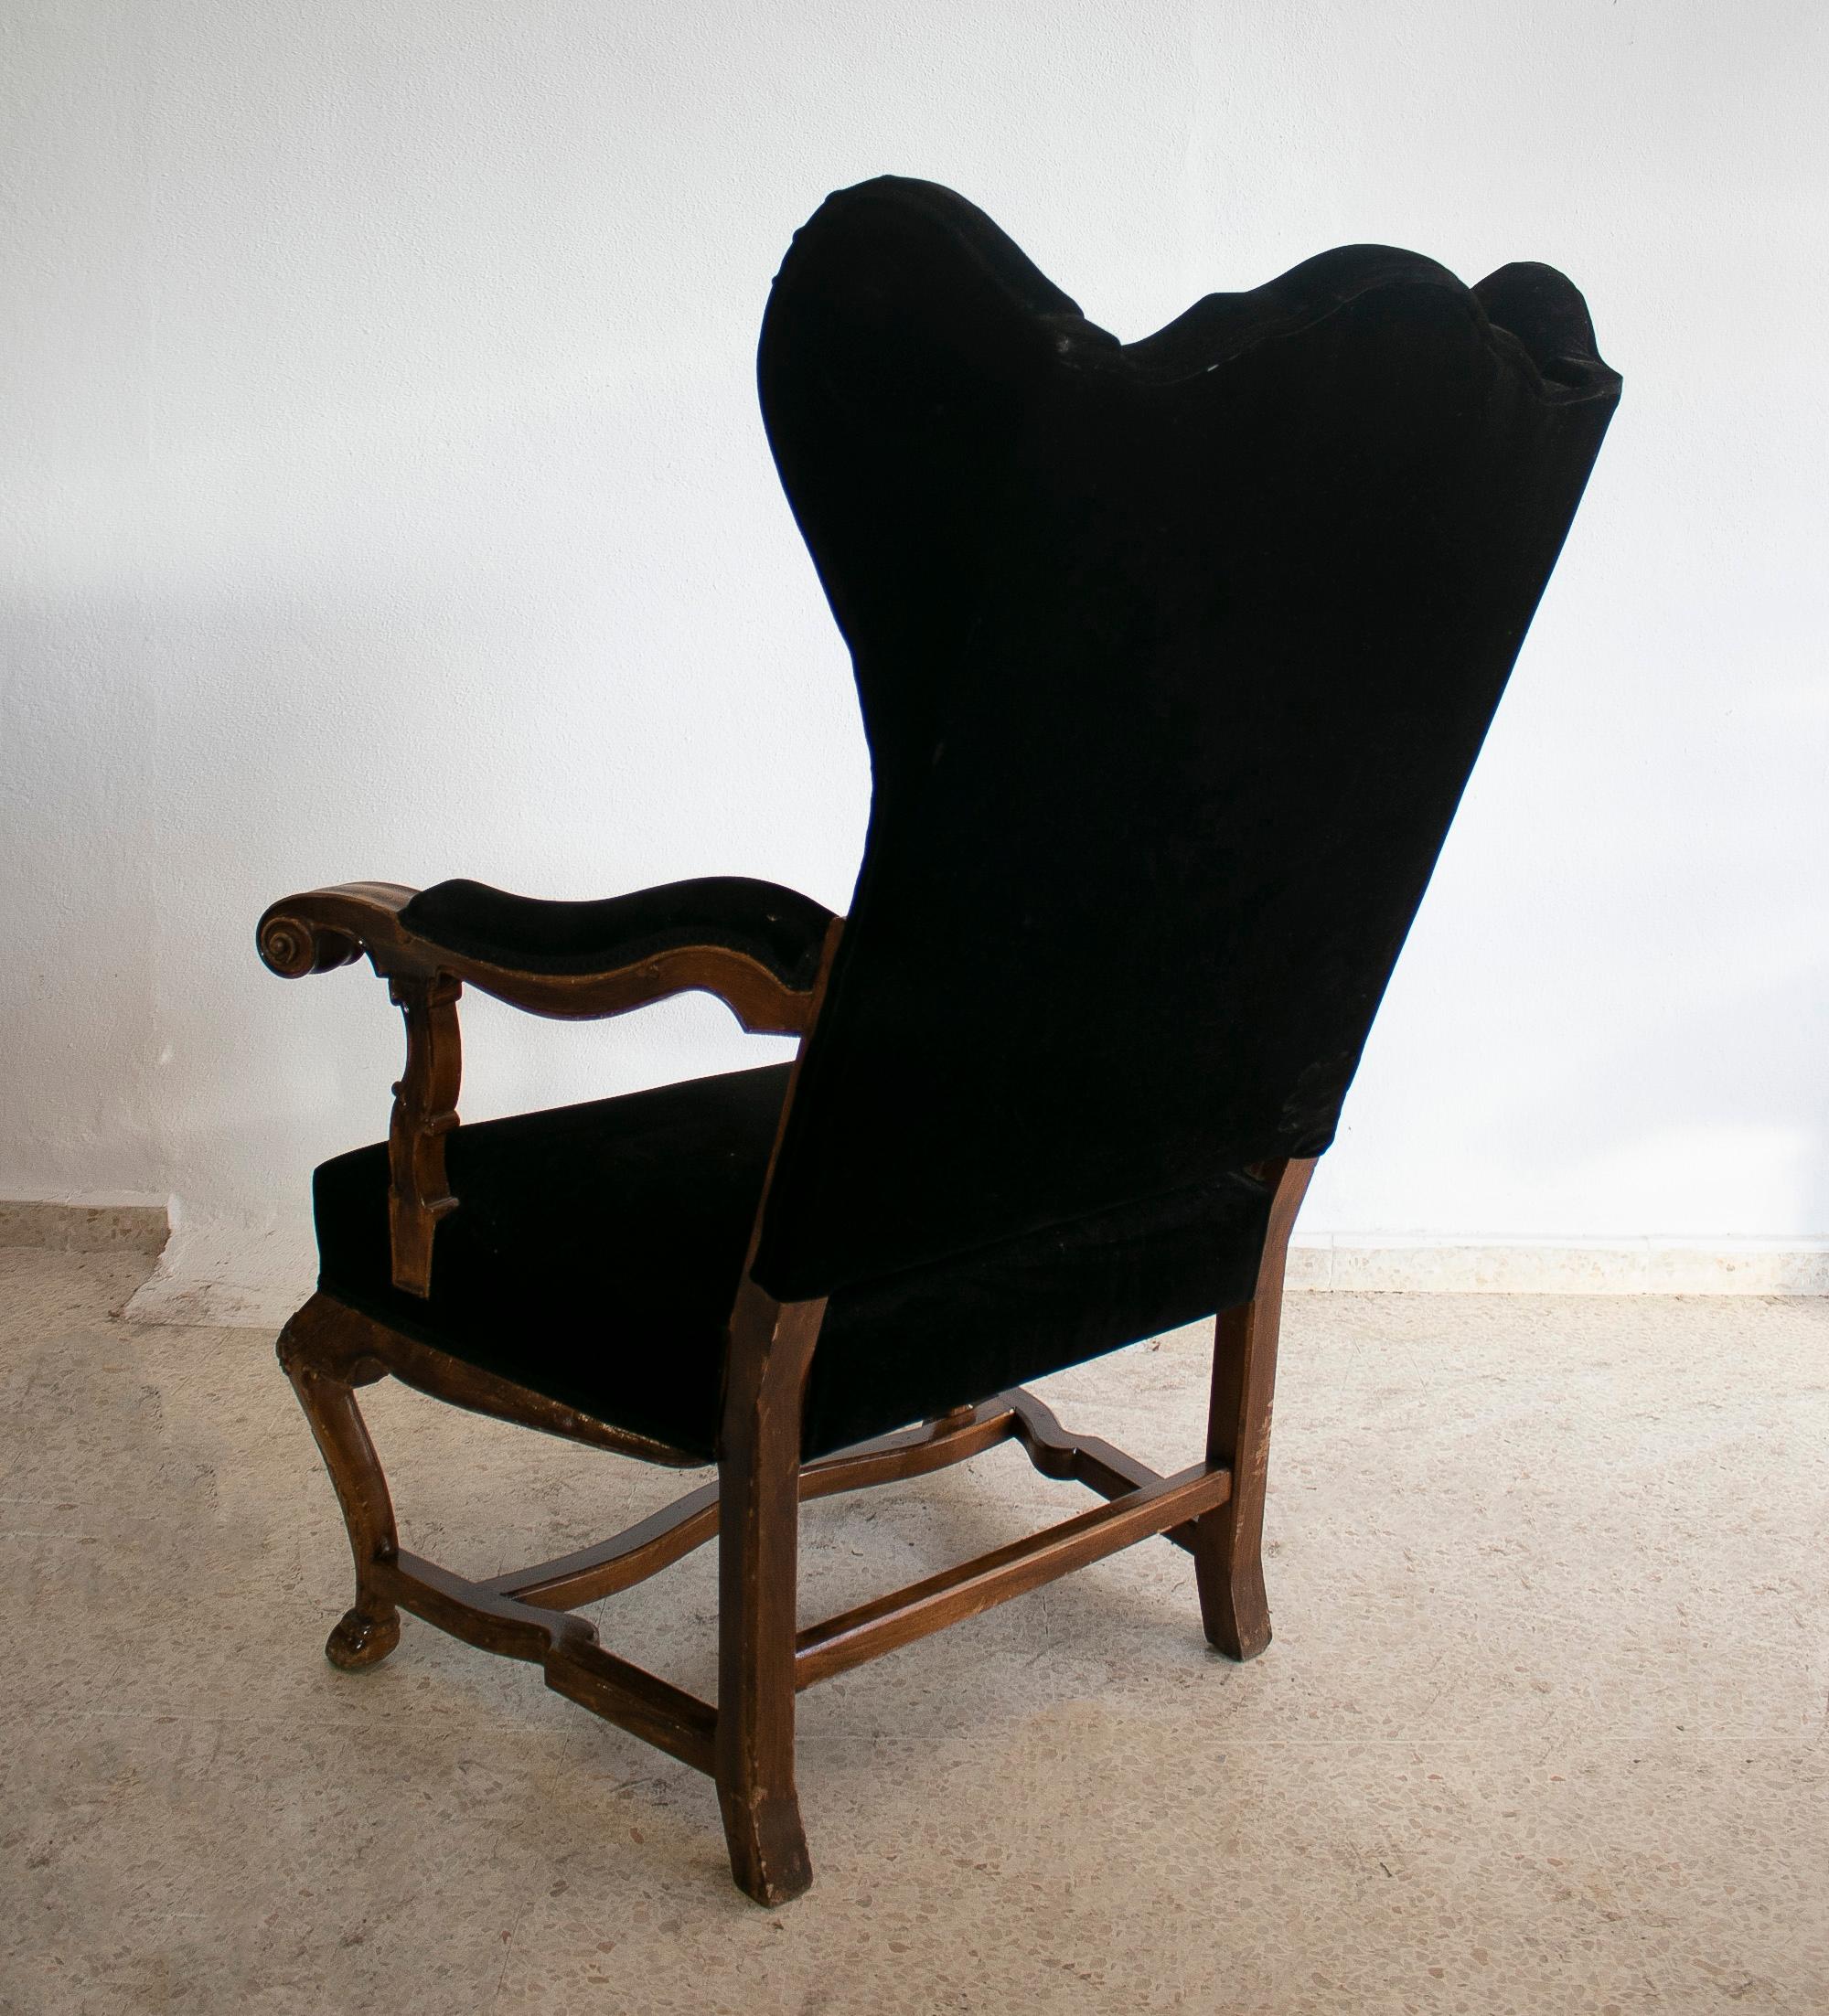 19th Century English Wooden Winged Armchair w/ Velvet Upholstery For Sale 2